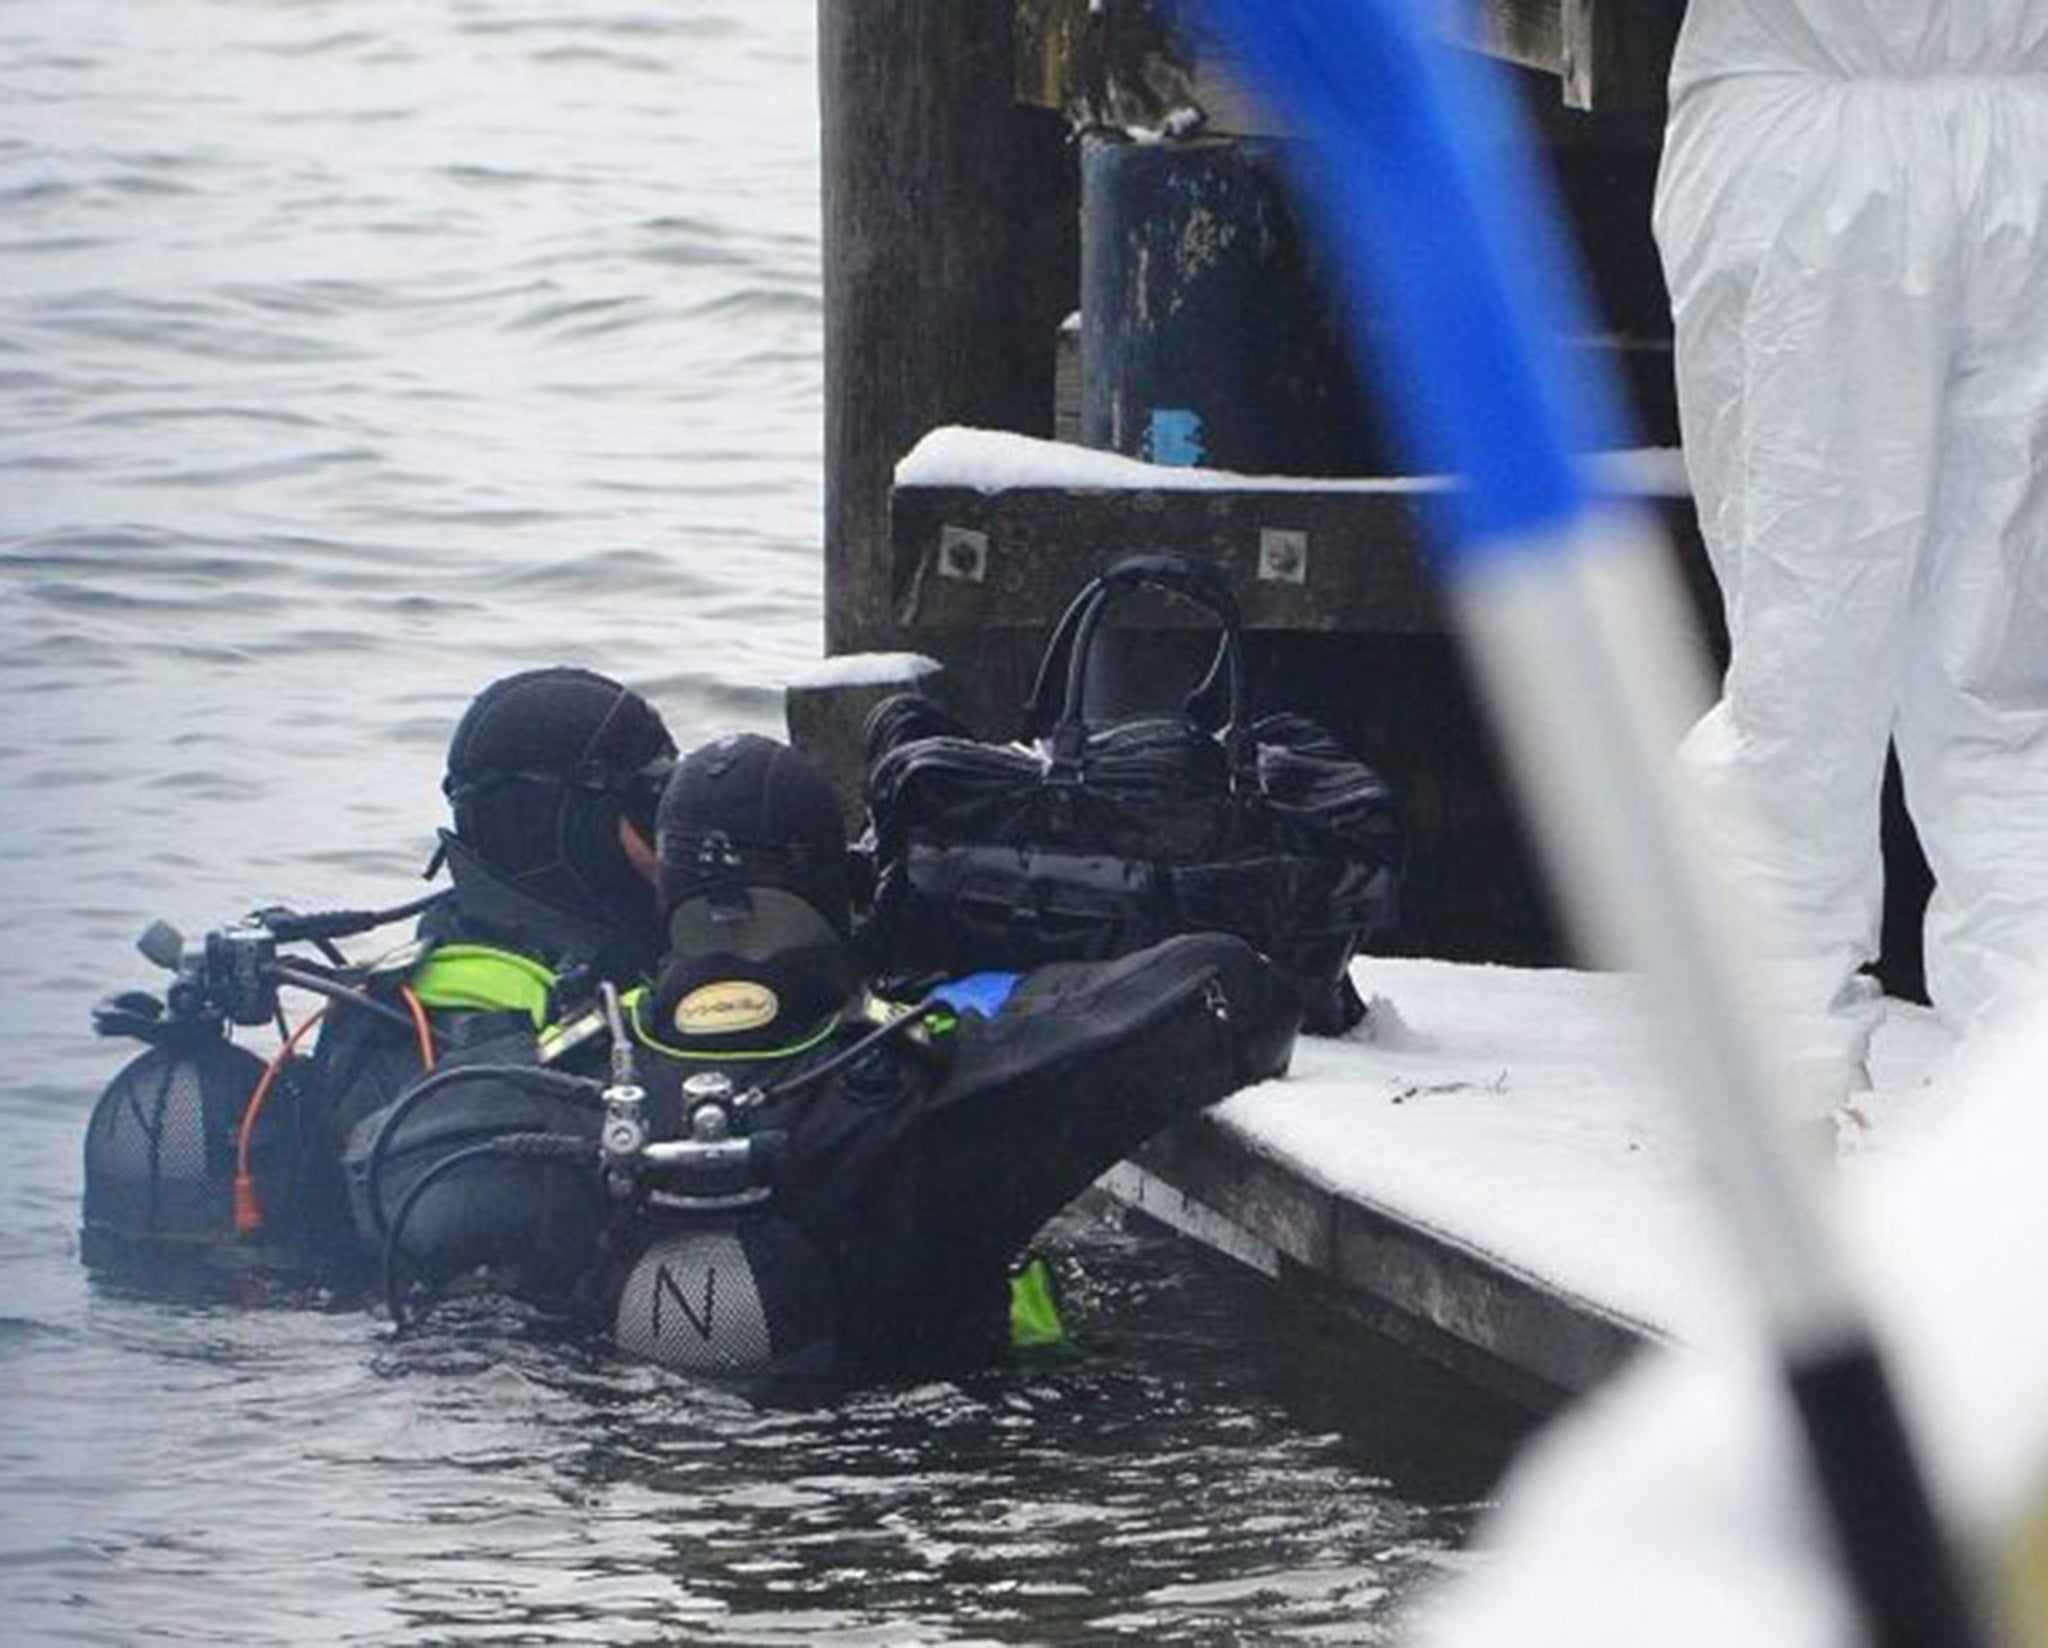 Divers recovering suitcases from the lake in Austria